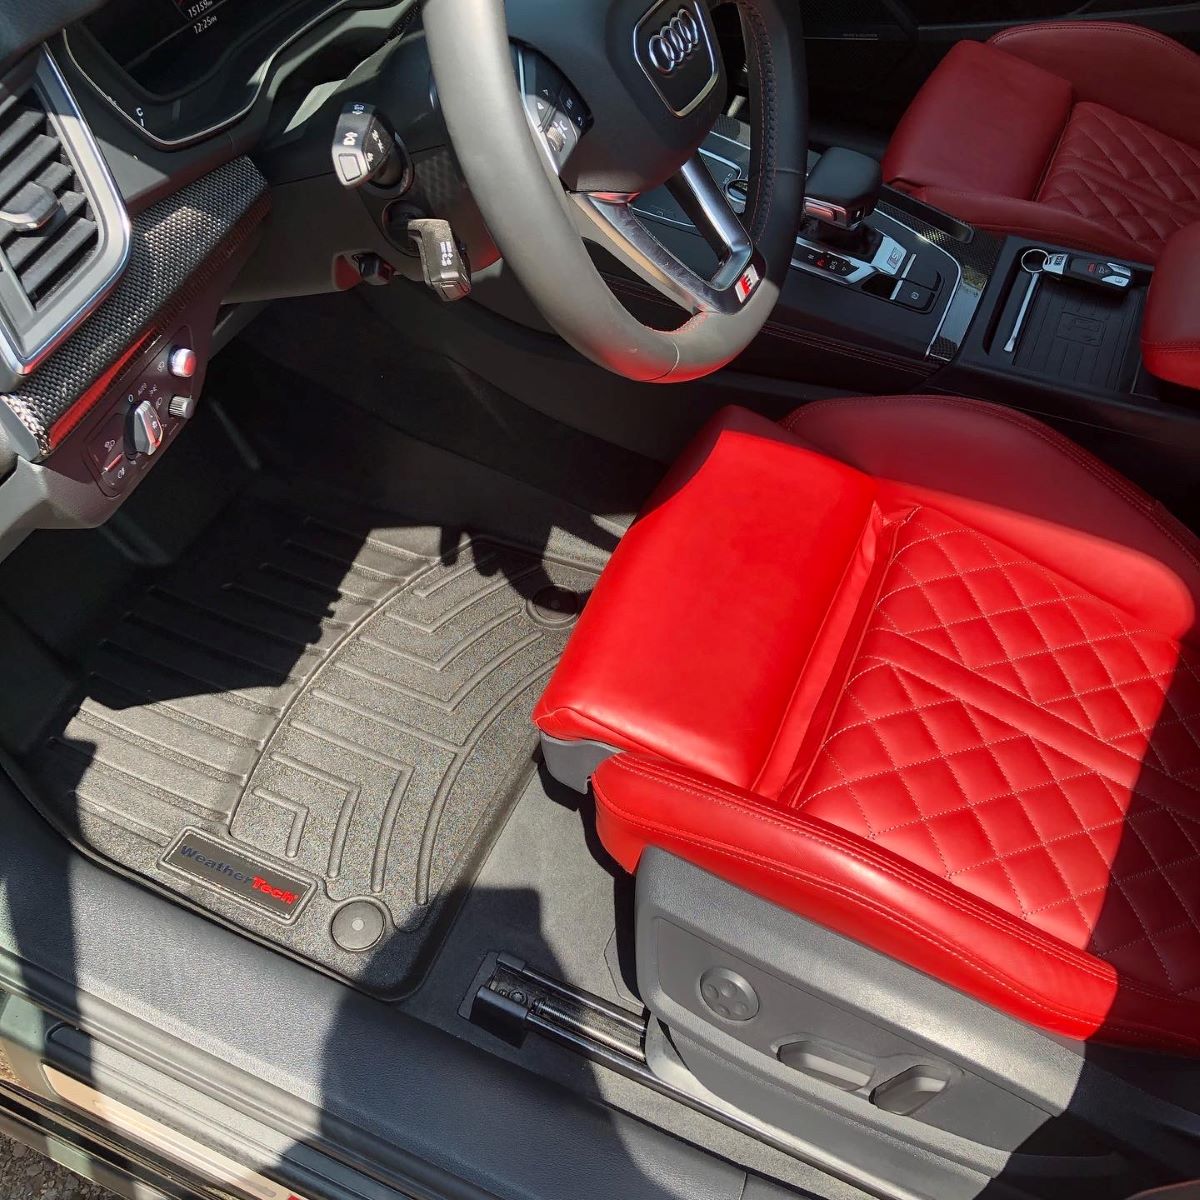 Audi SQ5 interior detailing in the beginners guide